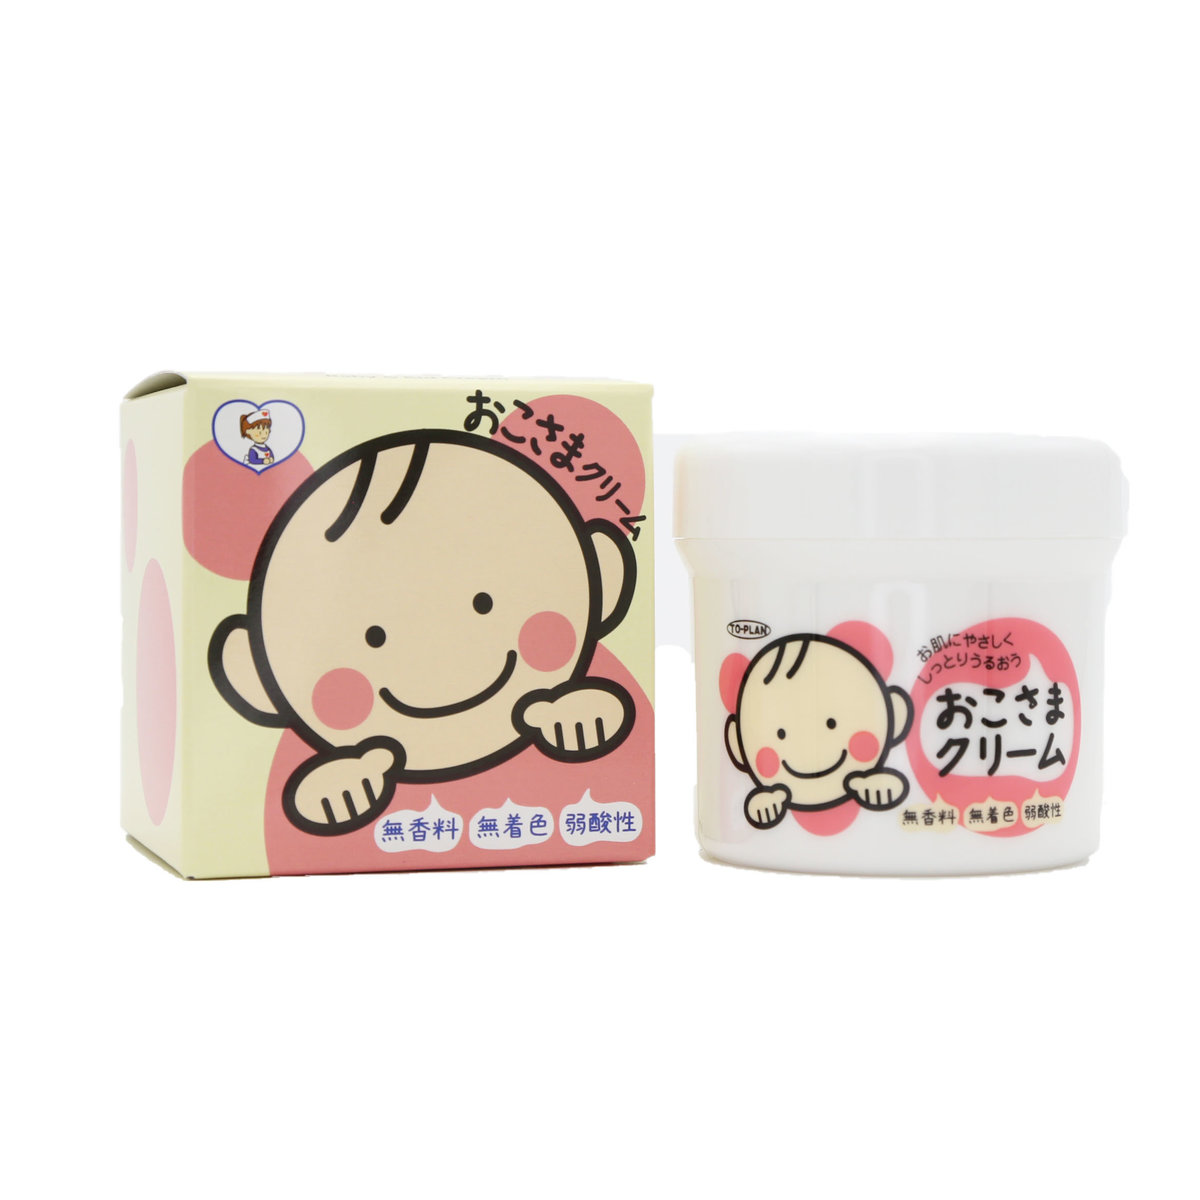 To-plan baby and kid cream